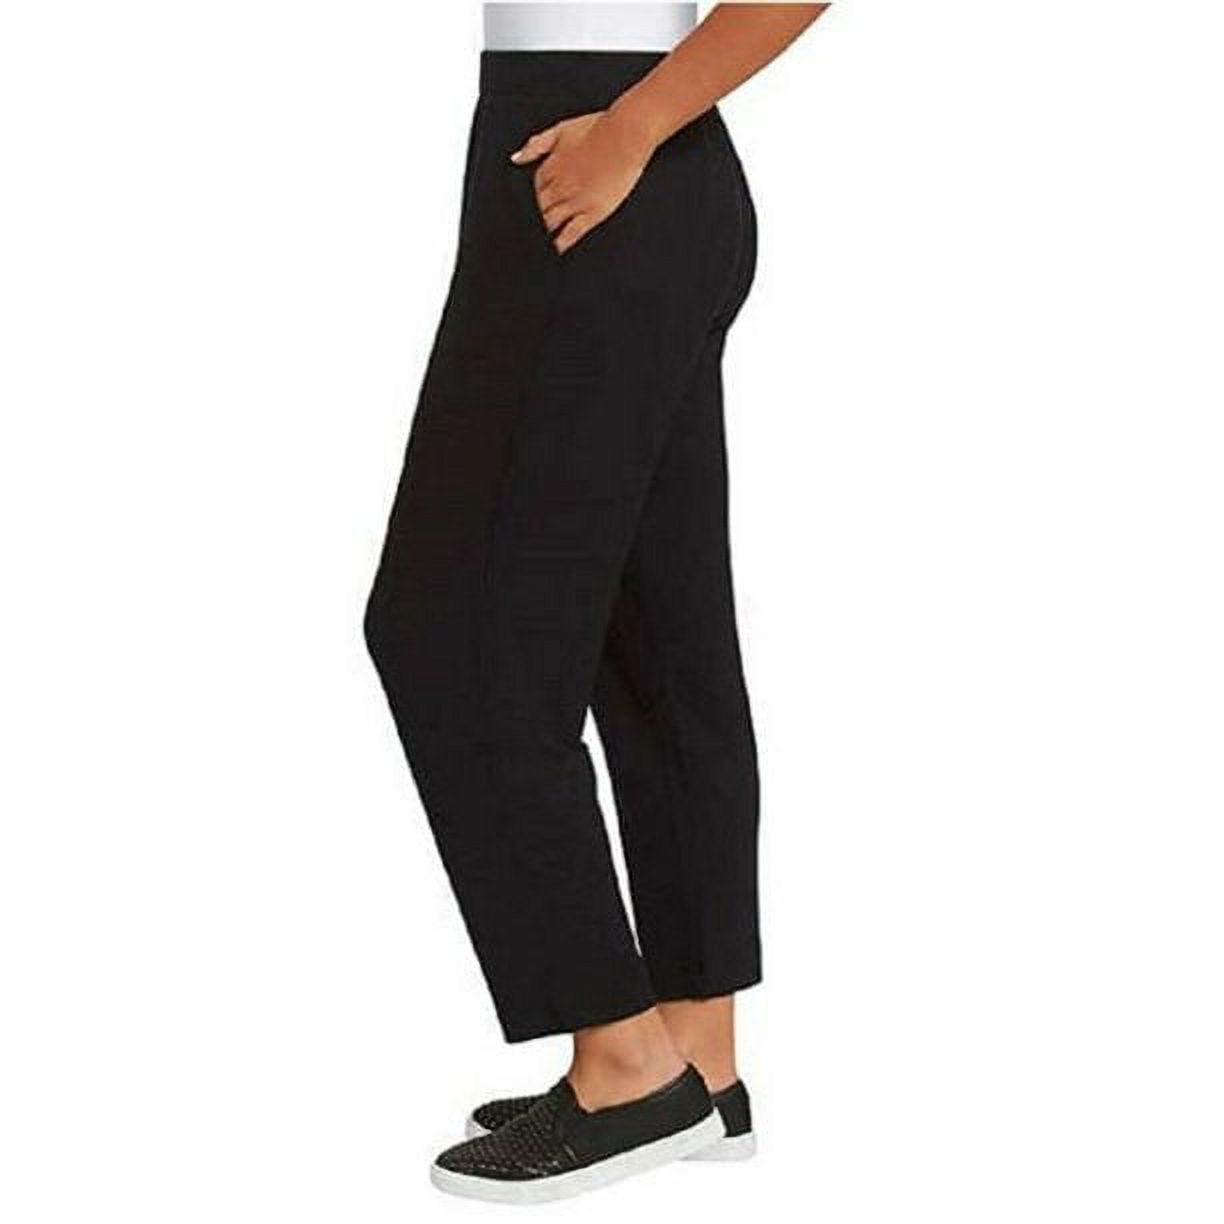 Jessica Simpson Women's Soft Pull On Pants Pockets Ankle Length